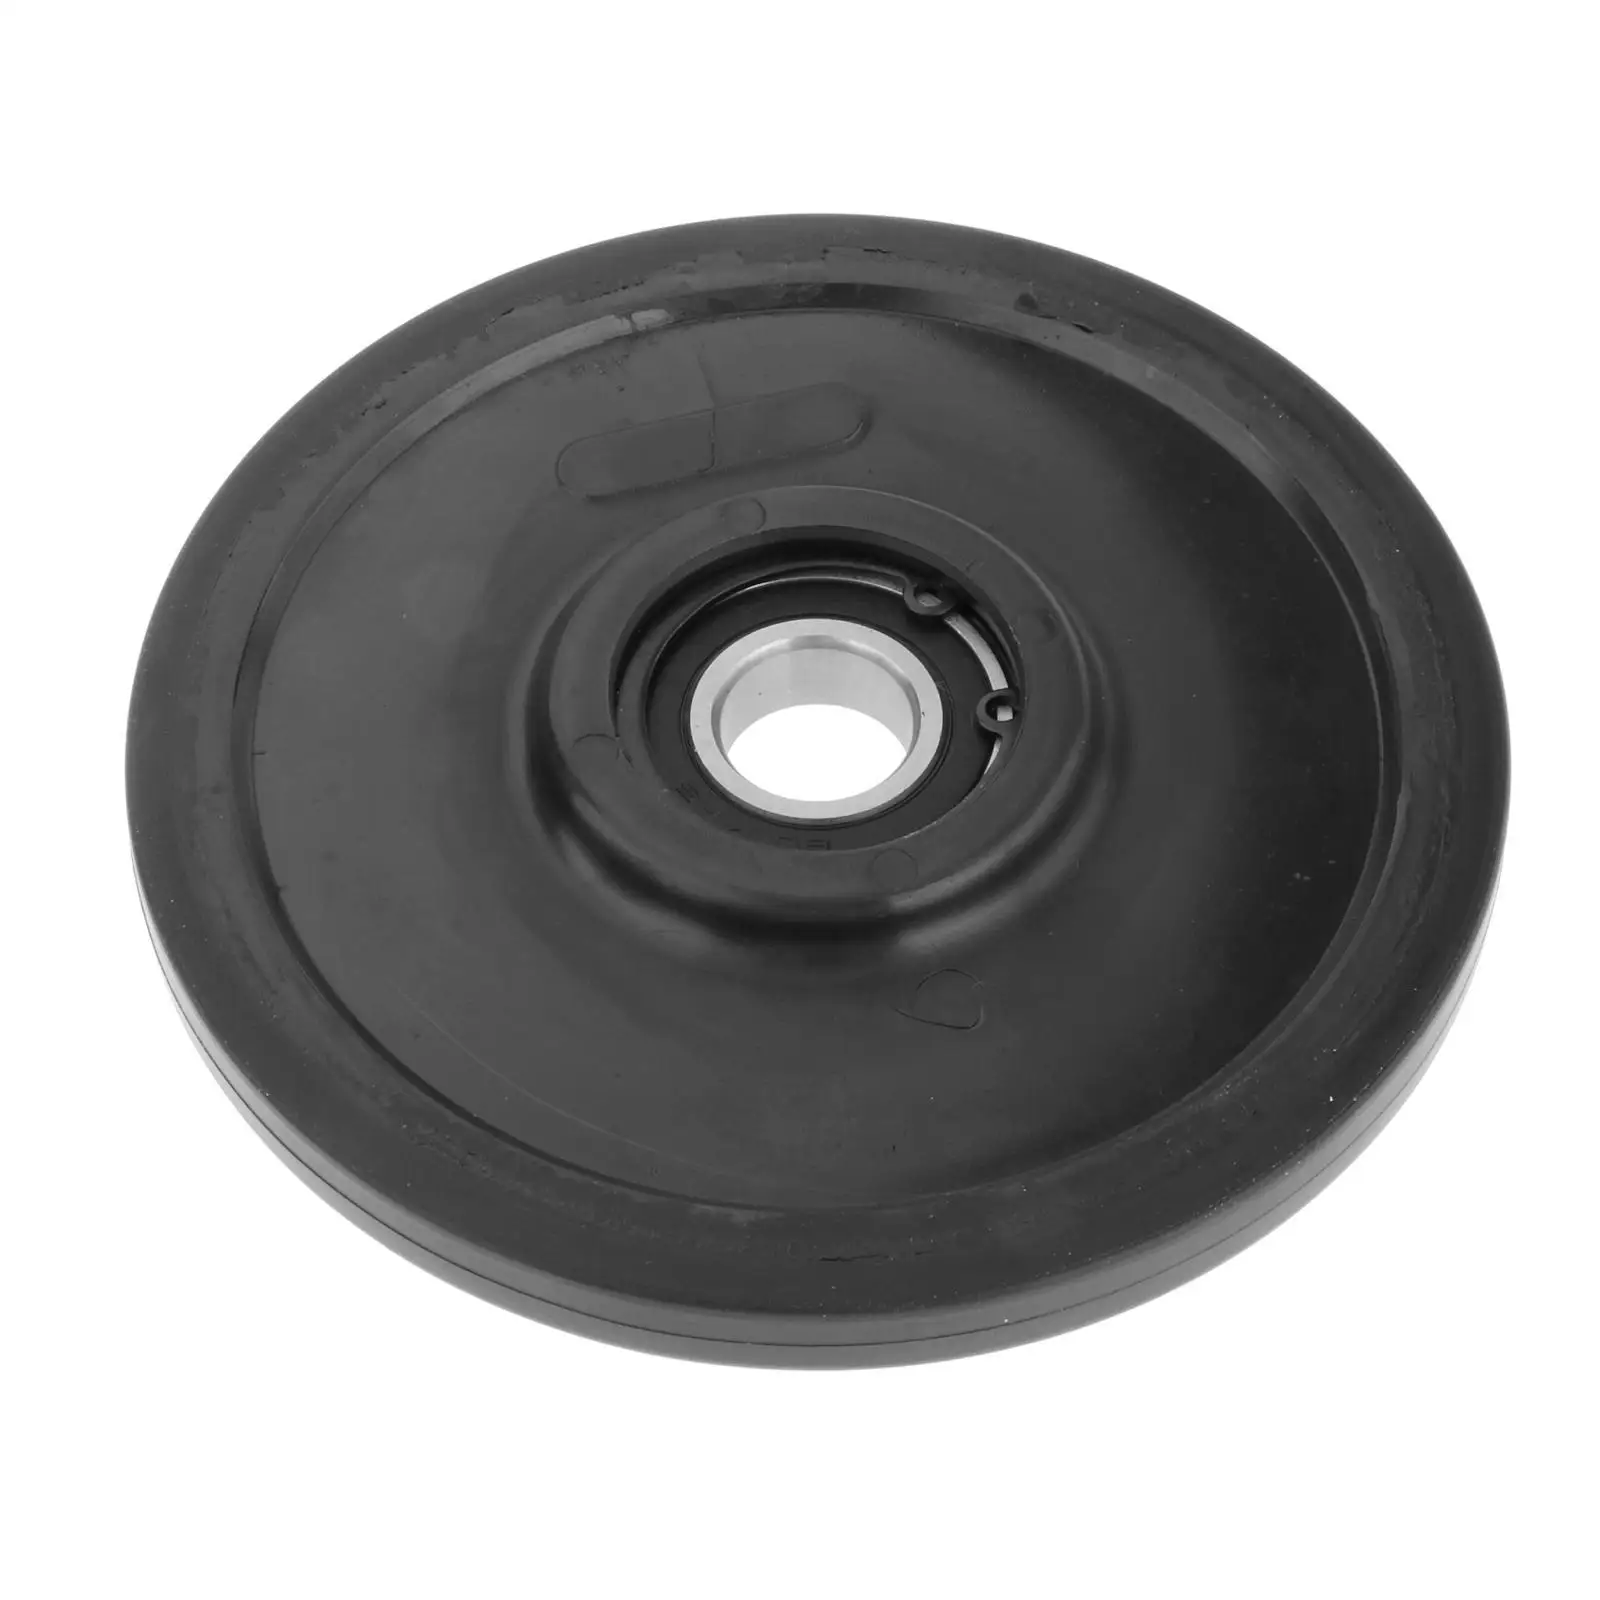 Snowmobile Idler Wheel with Bearing for Snowmobile 3604-807 Part